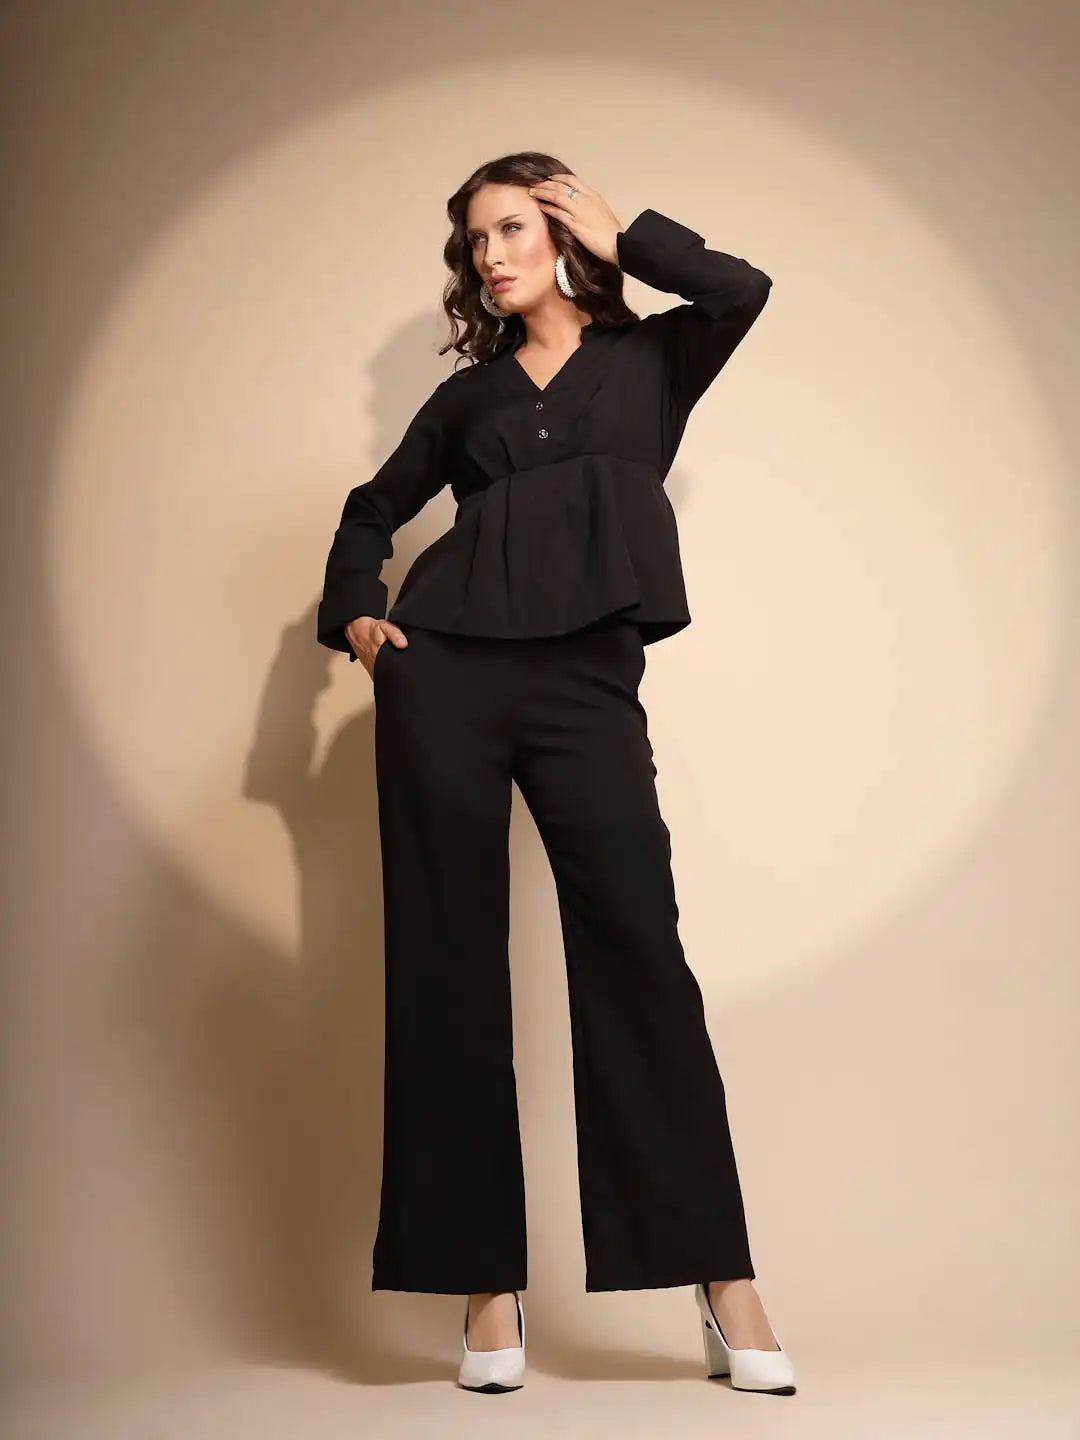 Women's Solid Collared Neck Black Co-ord Set